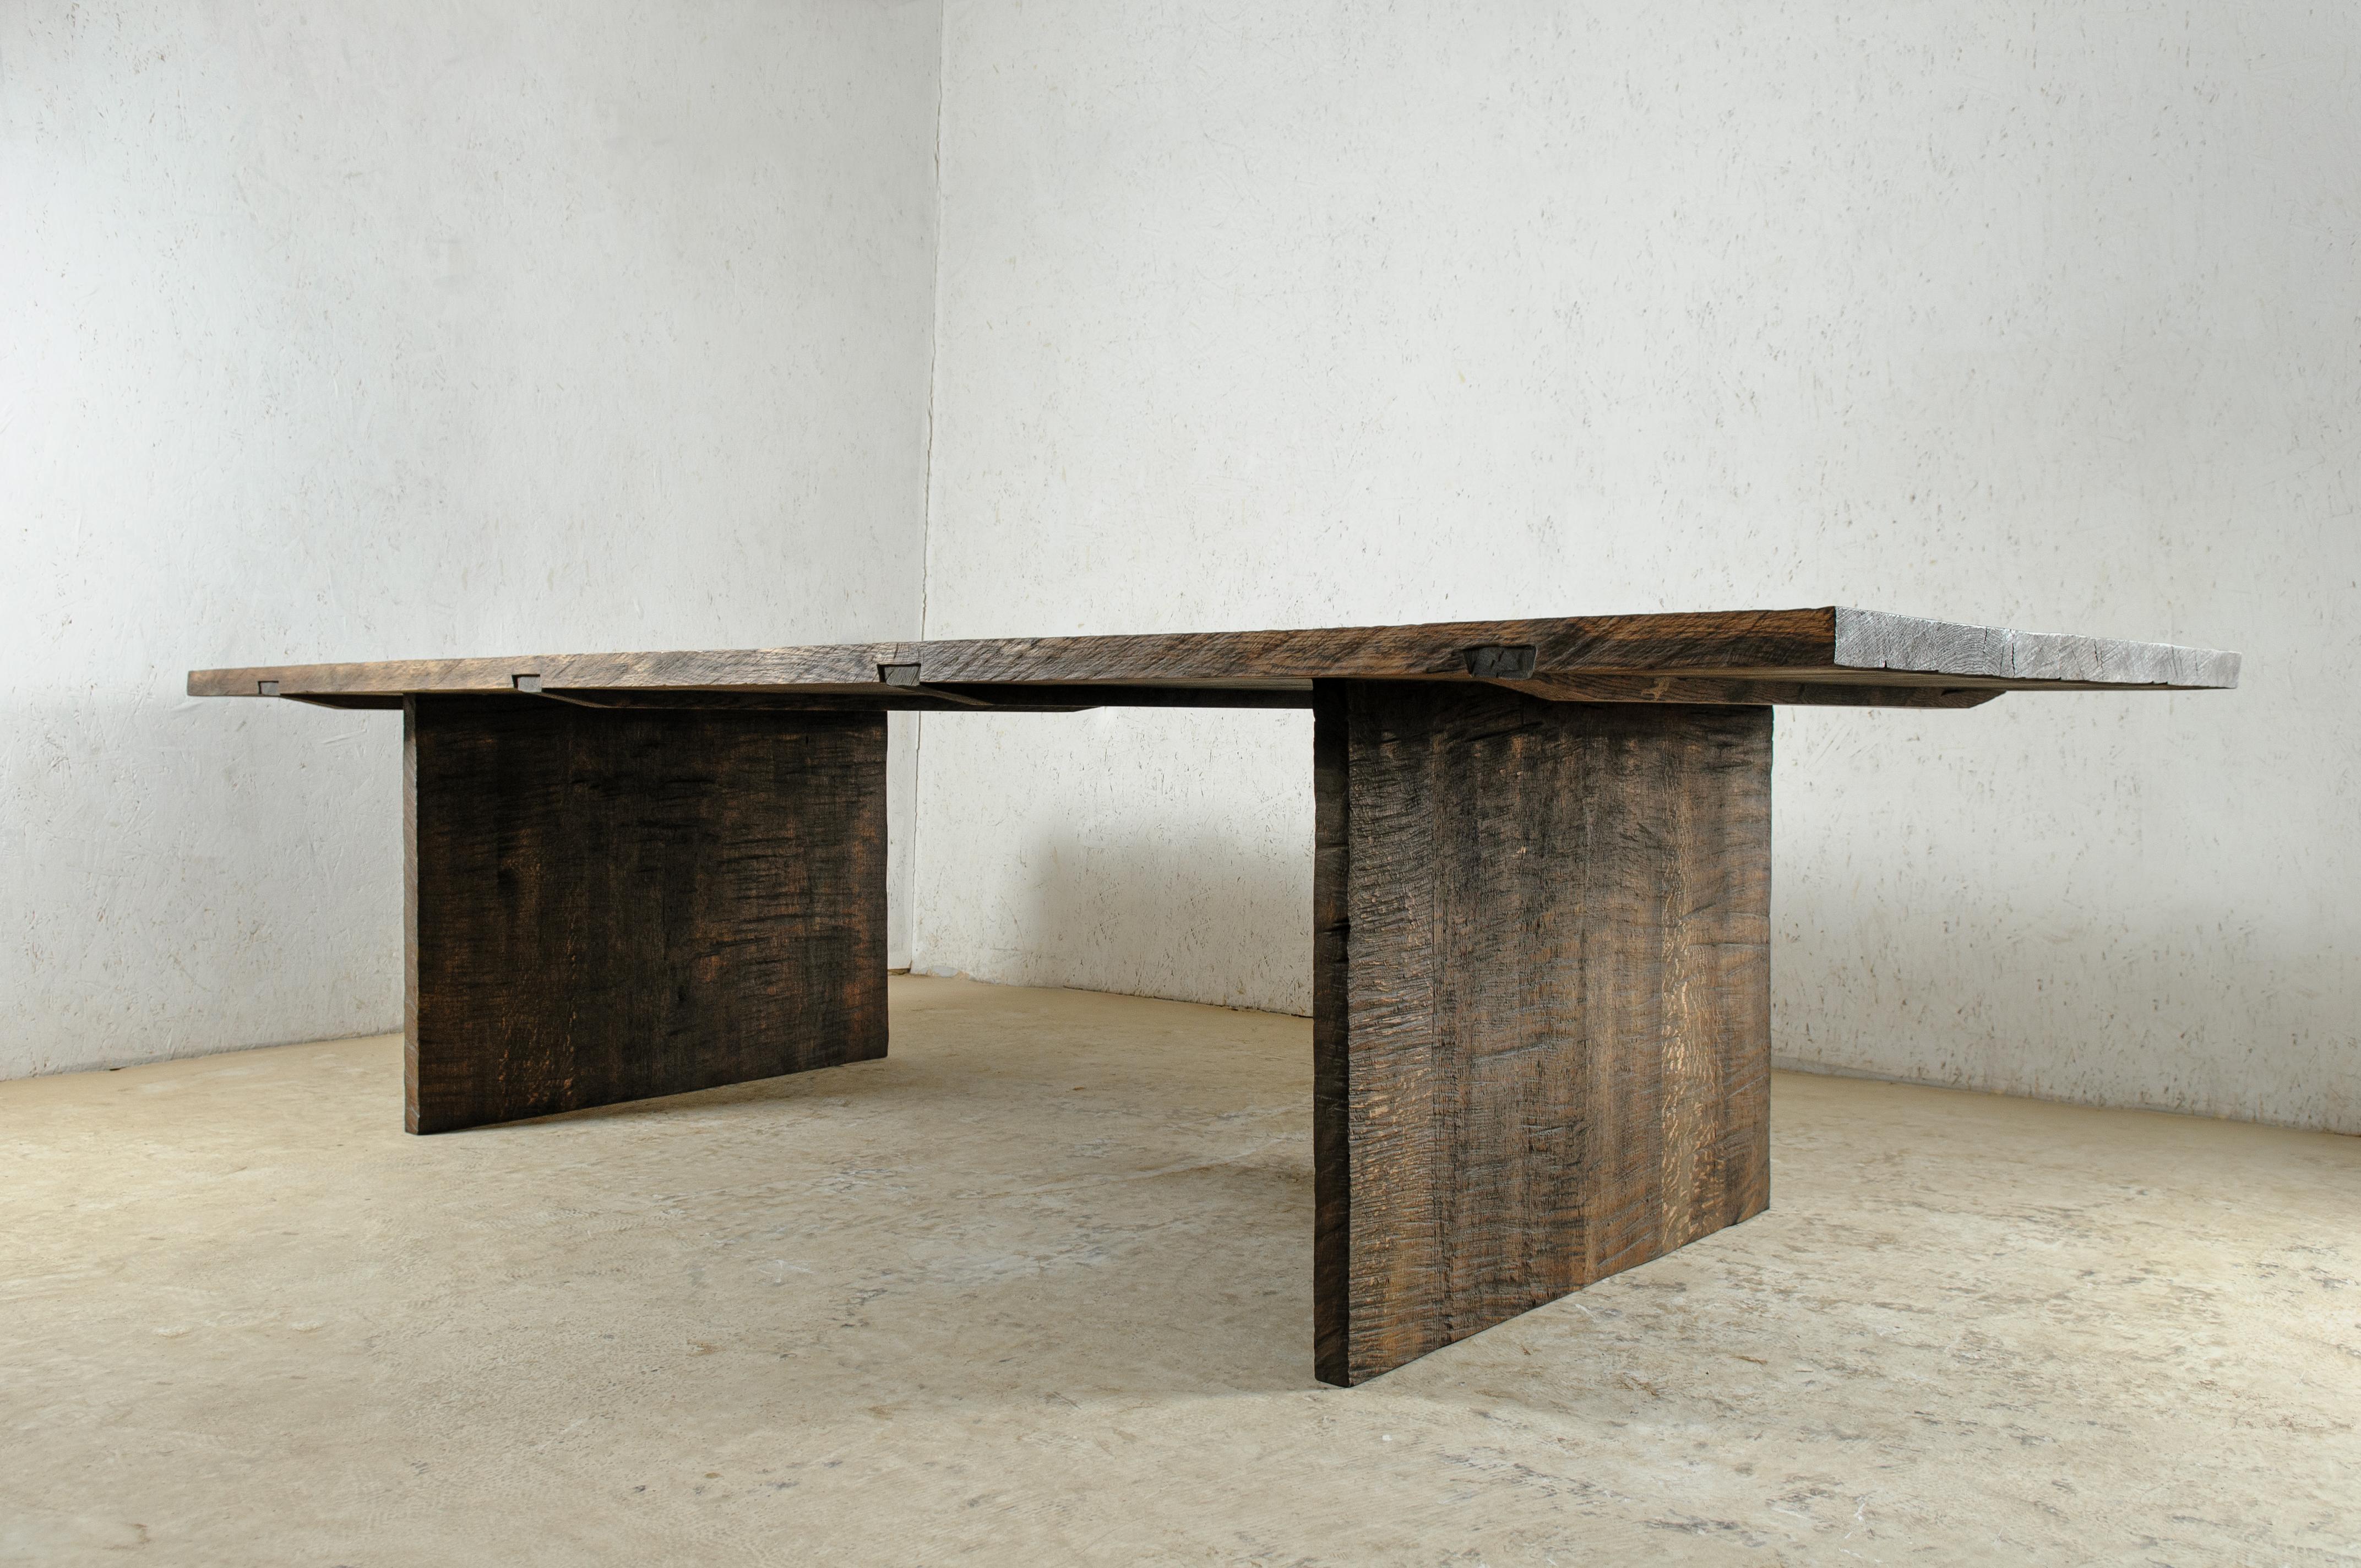 Dining dining table made of solid oak (+ linseed oil)
(Outdoor use OK)

Made to order - Custom size

SÓHA design studio conceives and produces furniture design and decorative objects in solid oak in an authentic style. Inspiration to create all